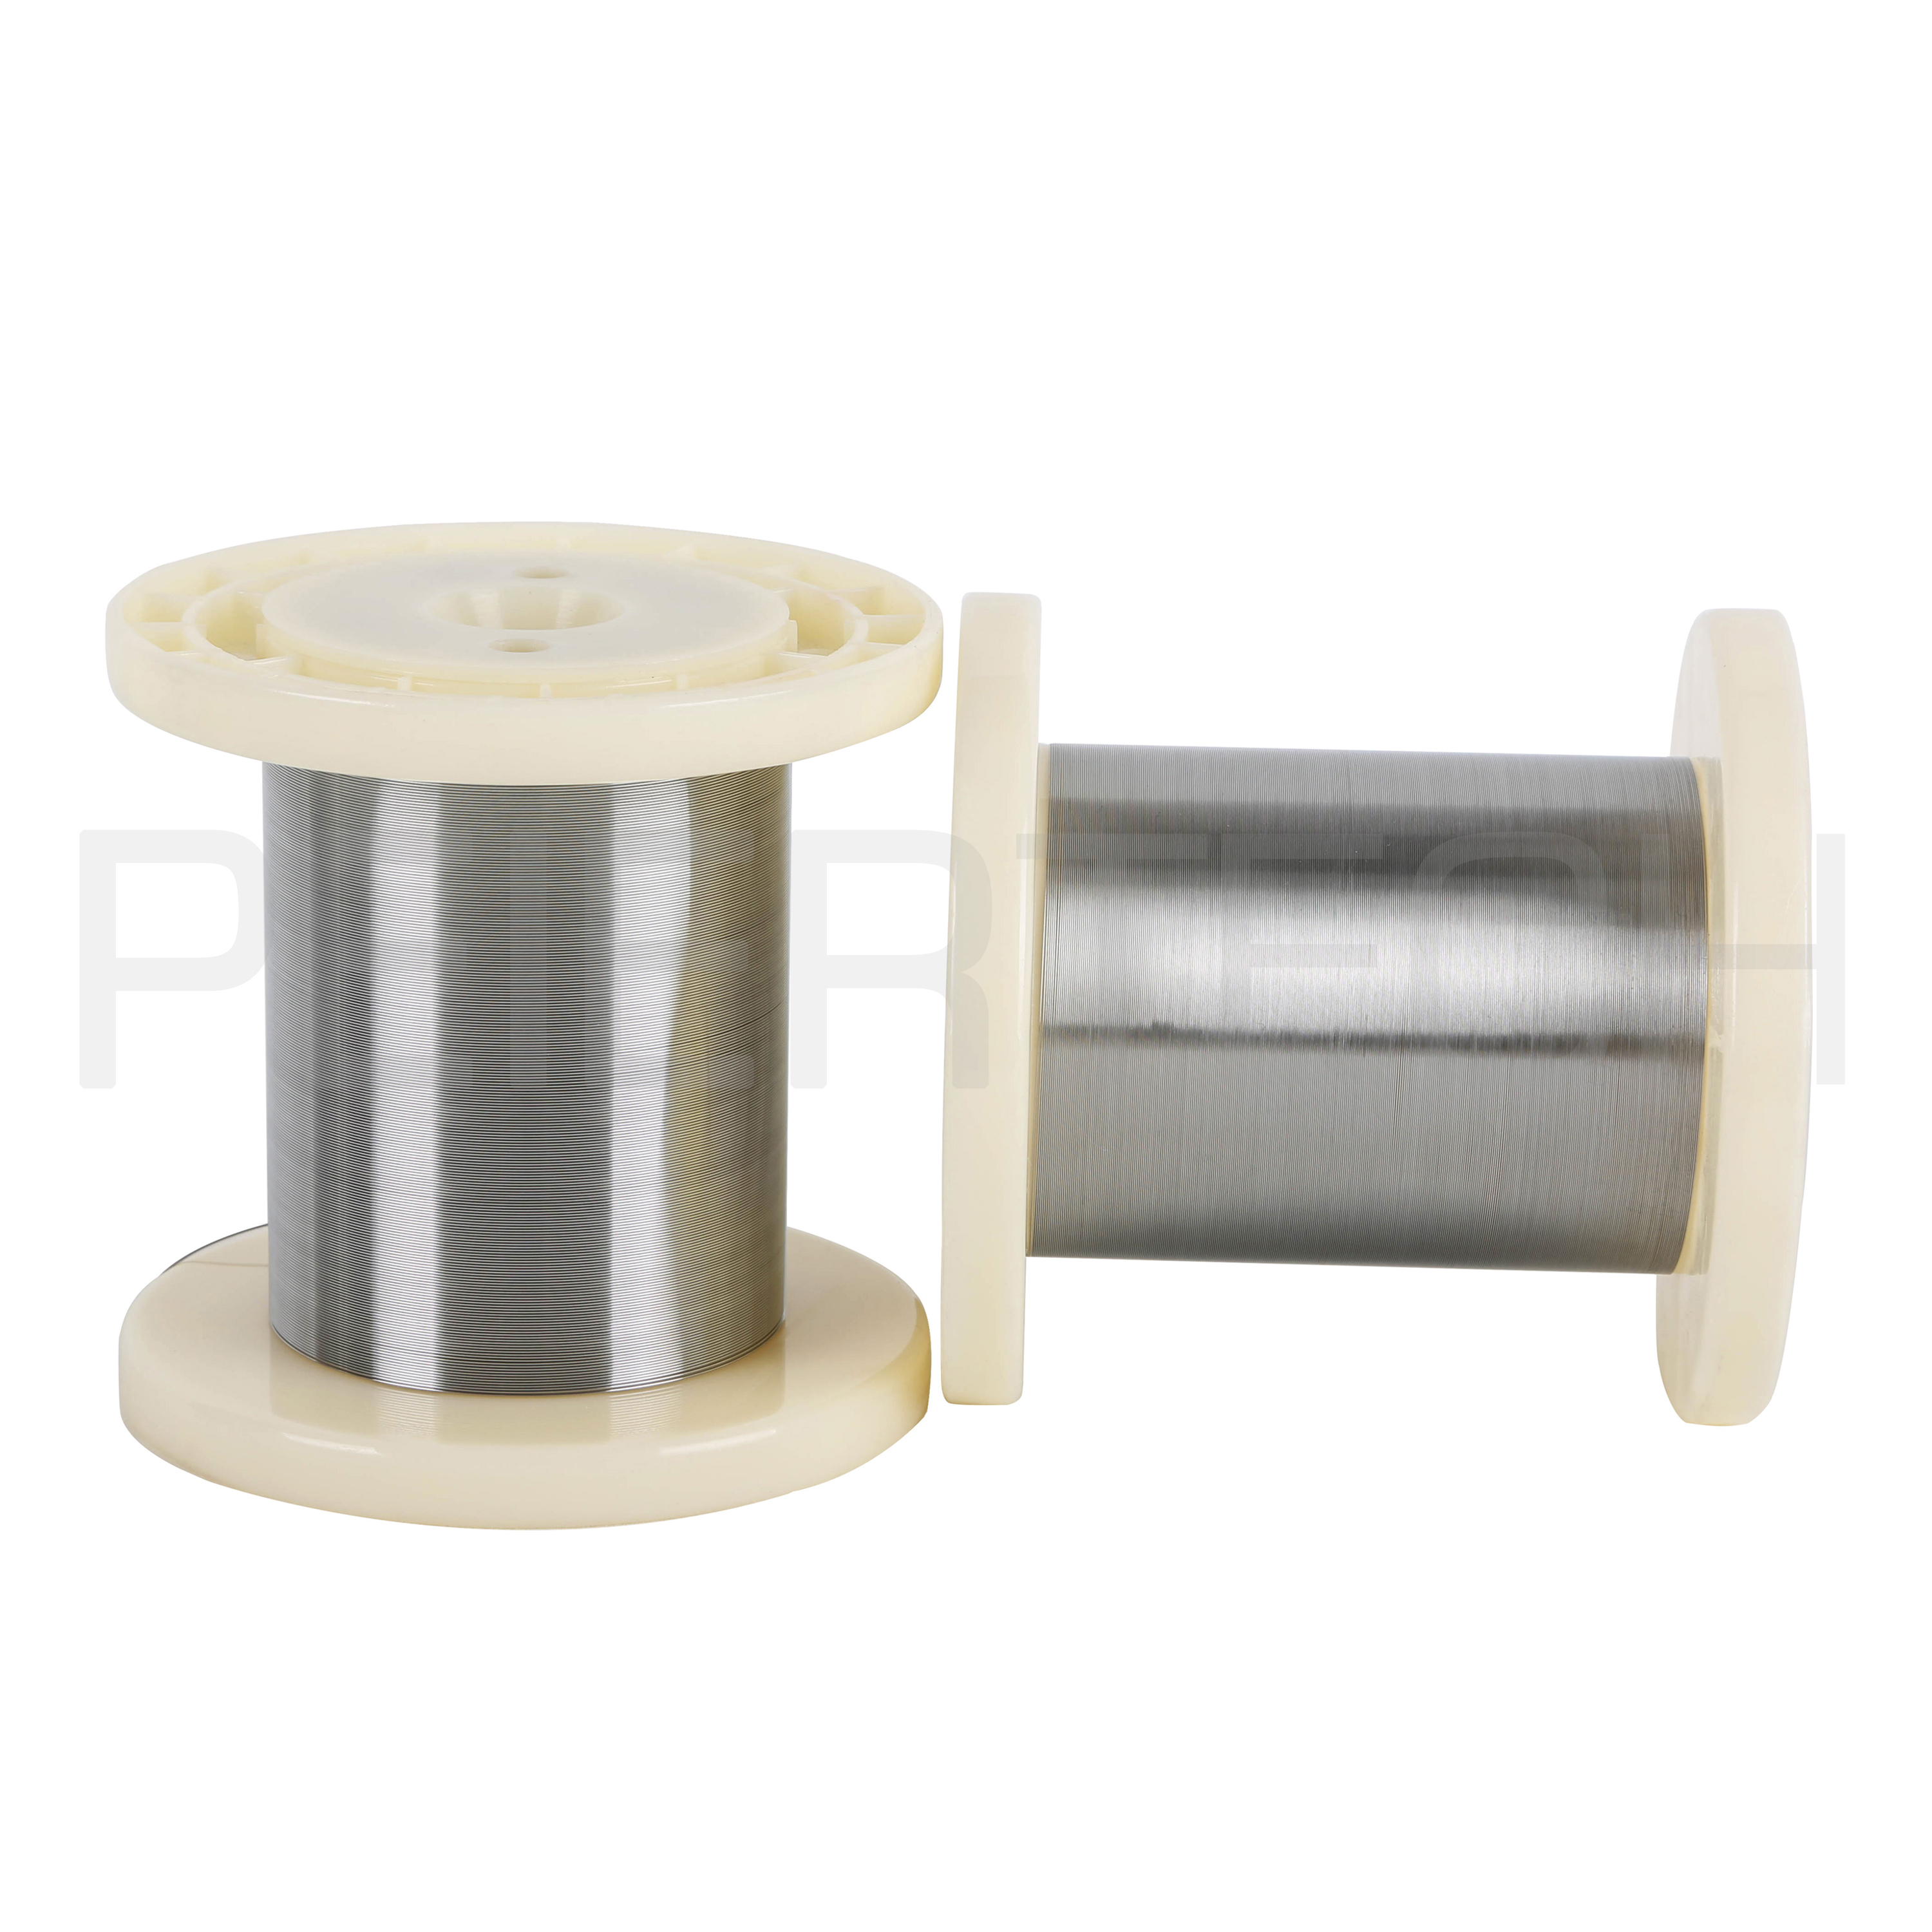 Nitinol wire is used in a variety of applications including medical devices